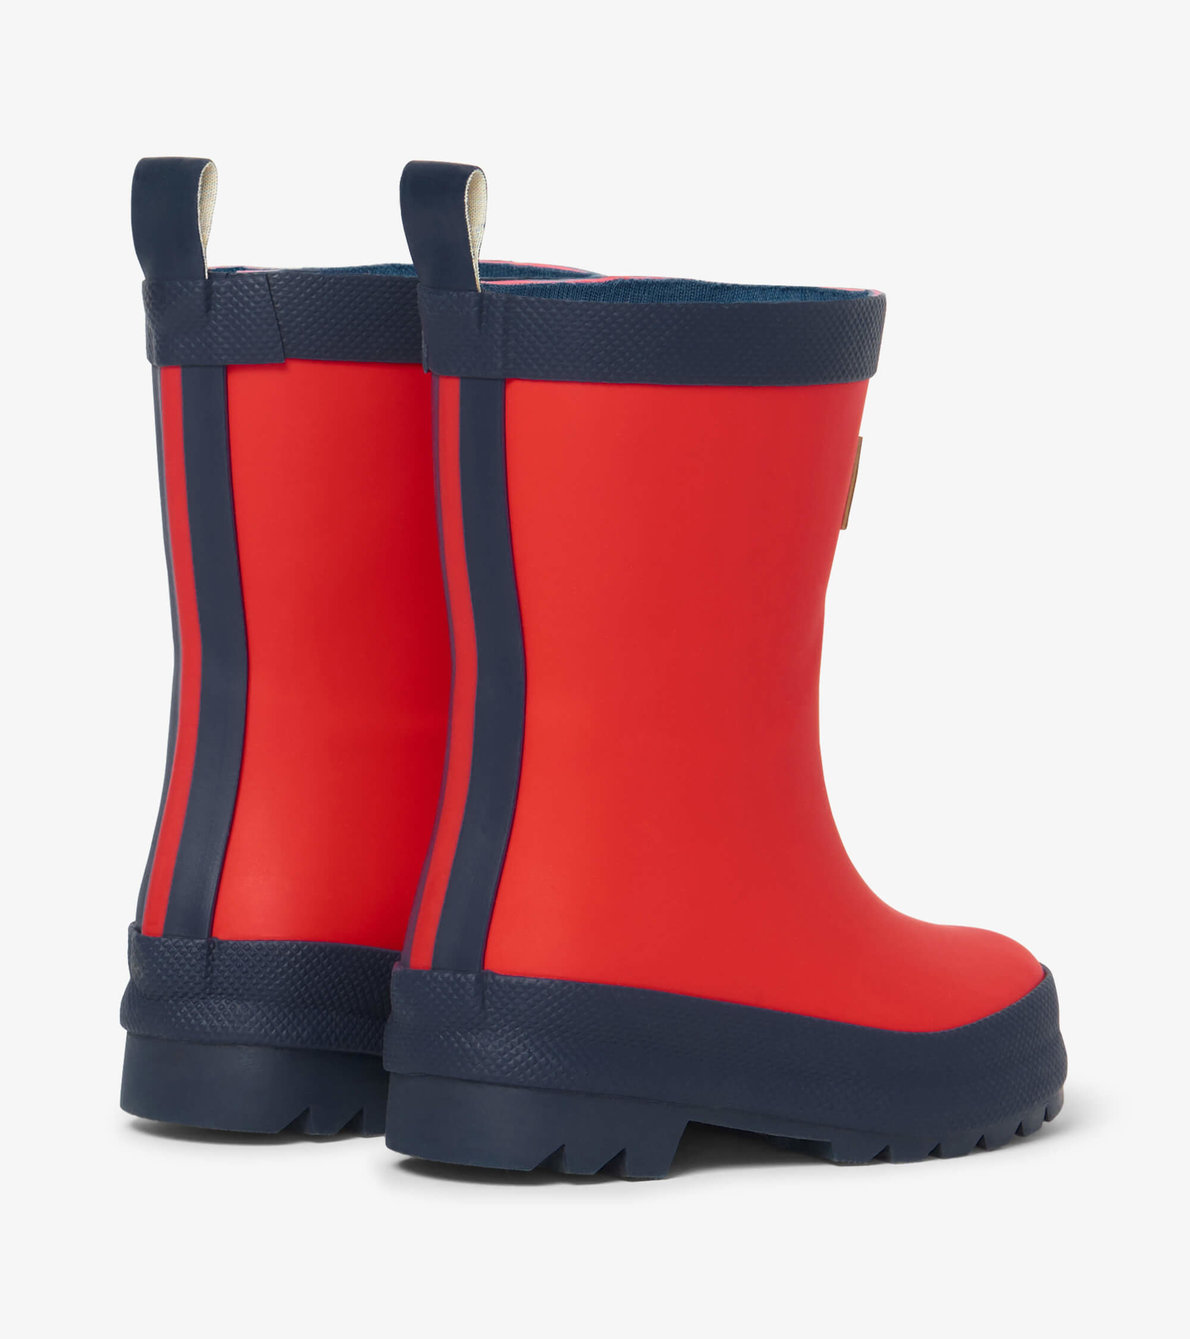 View larger image of My 1st Wellies - Red & Navy